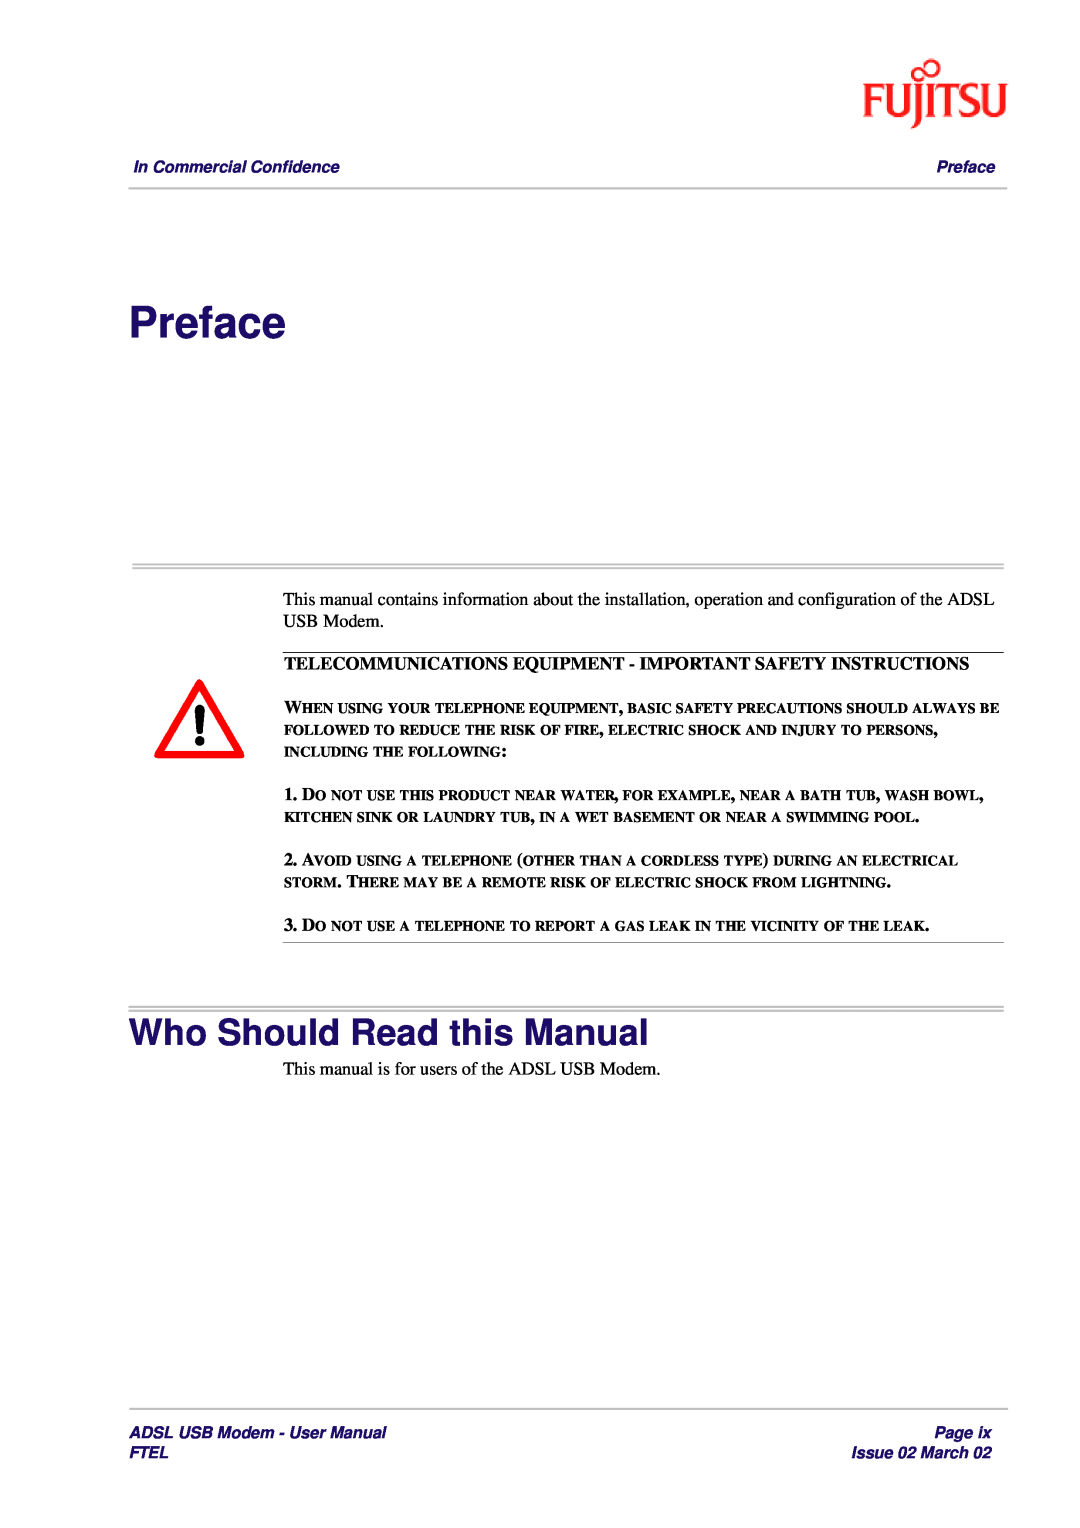 Fujitsu 3XAX-00803AAS Preface, Who Should Read this Manual, Telecommunications Equipment - Important Safety Instructions 